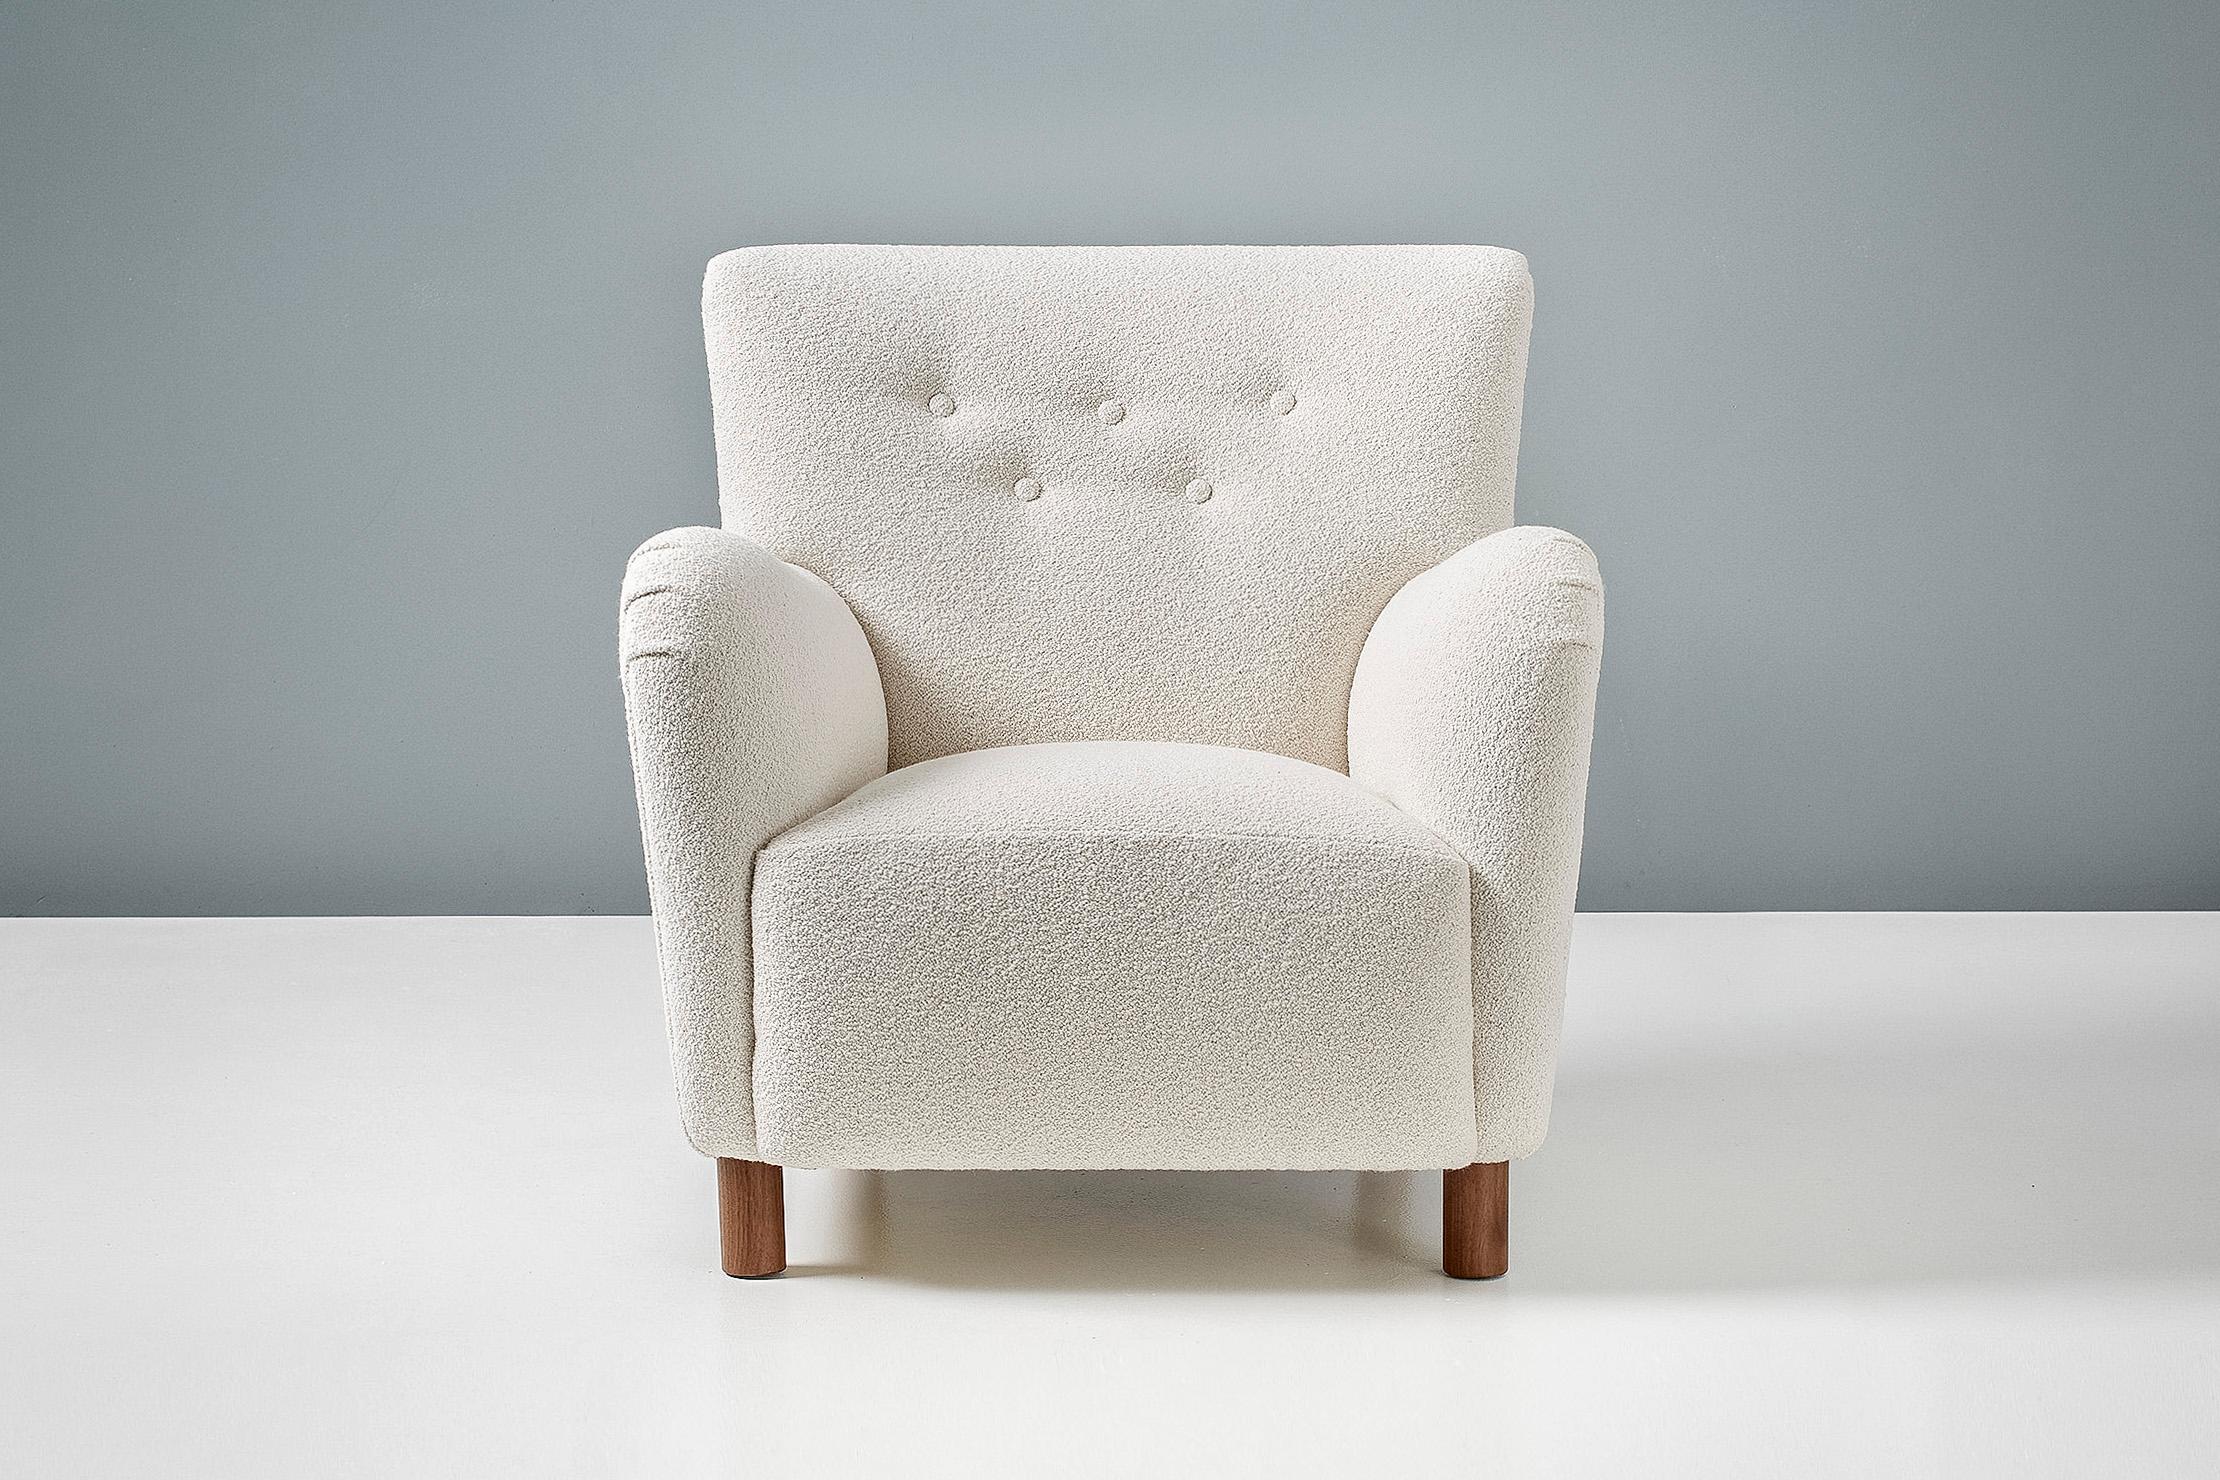 Dagmar design Model 54 lounge chair

A pair of custom made lounge chairs developed and produced at our workshops in London using the highest quality materials. These examples are upholstered in luxurious cotton-wool blend off-white bouclé fabric and